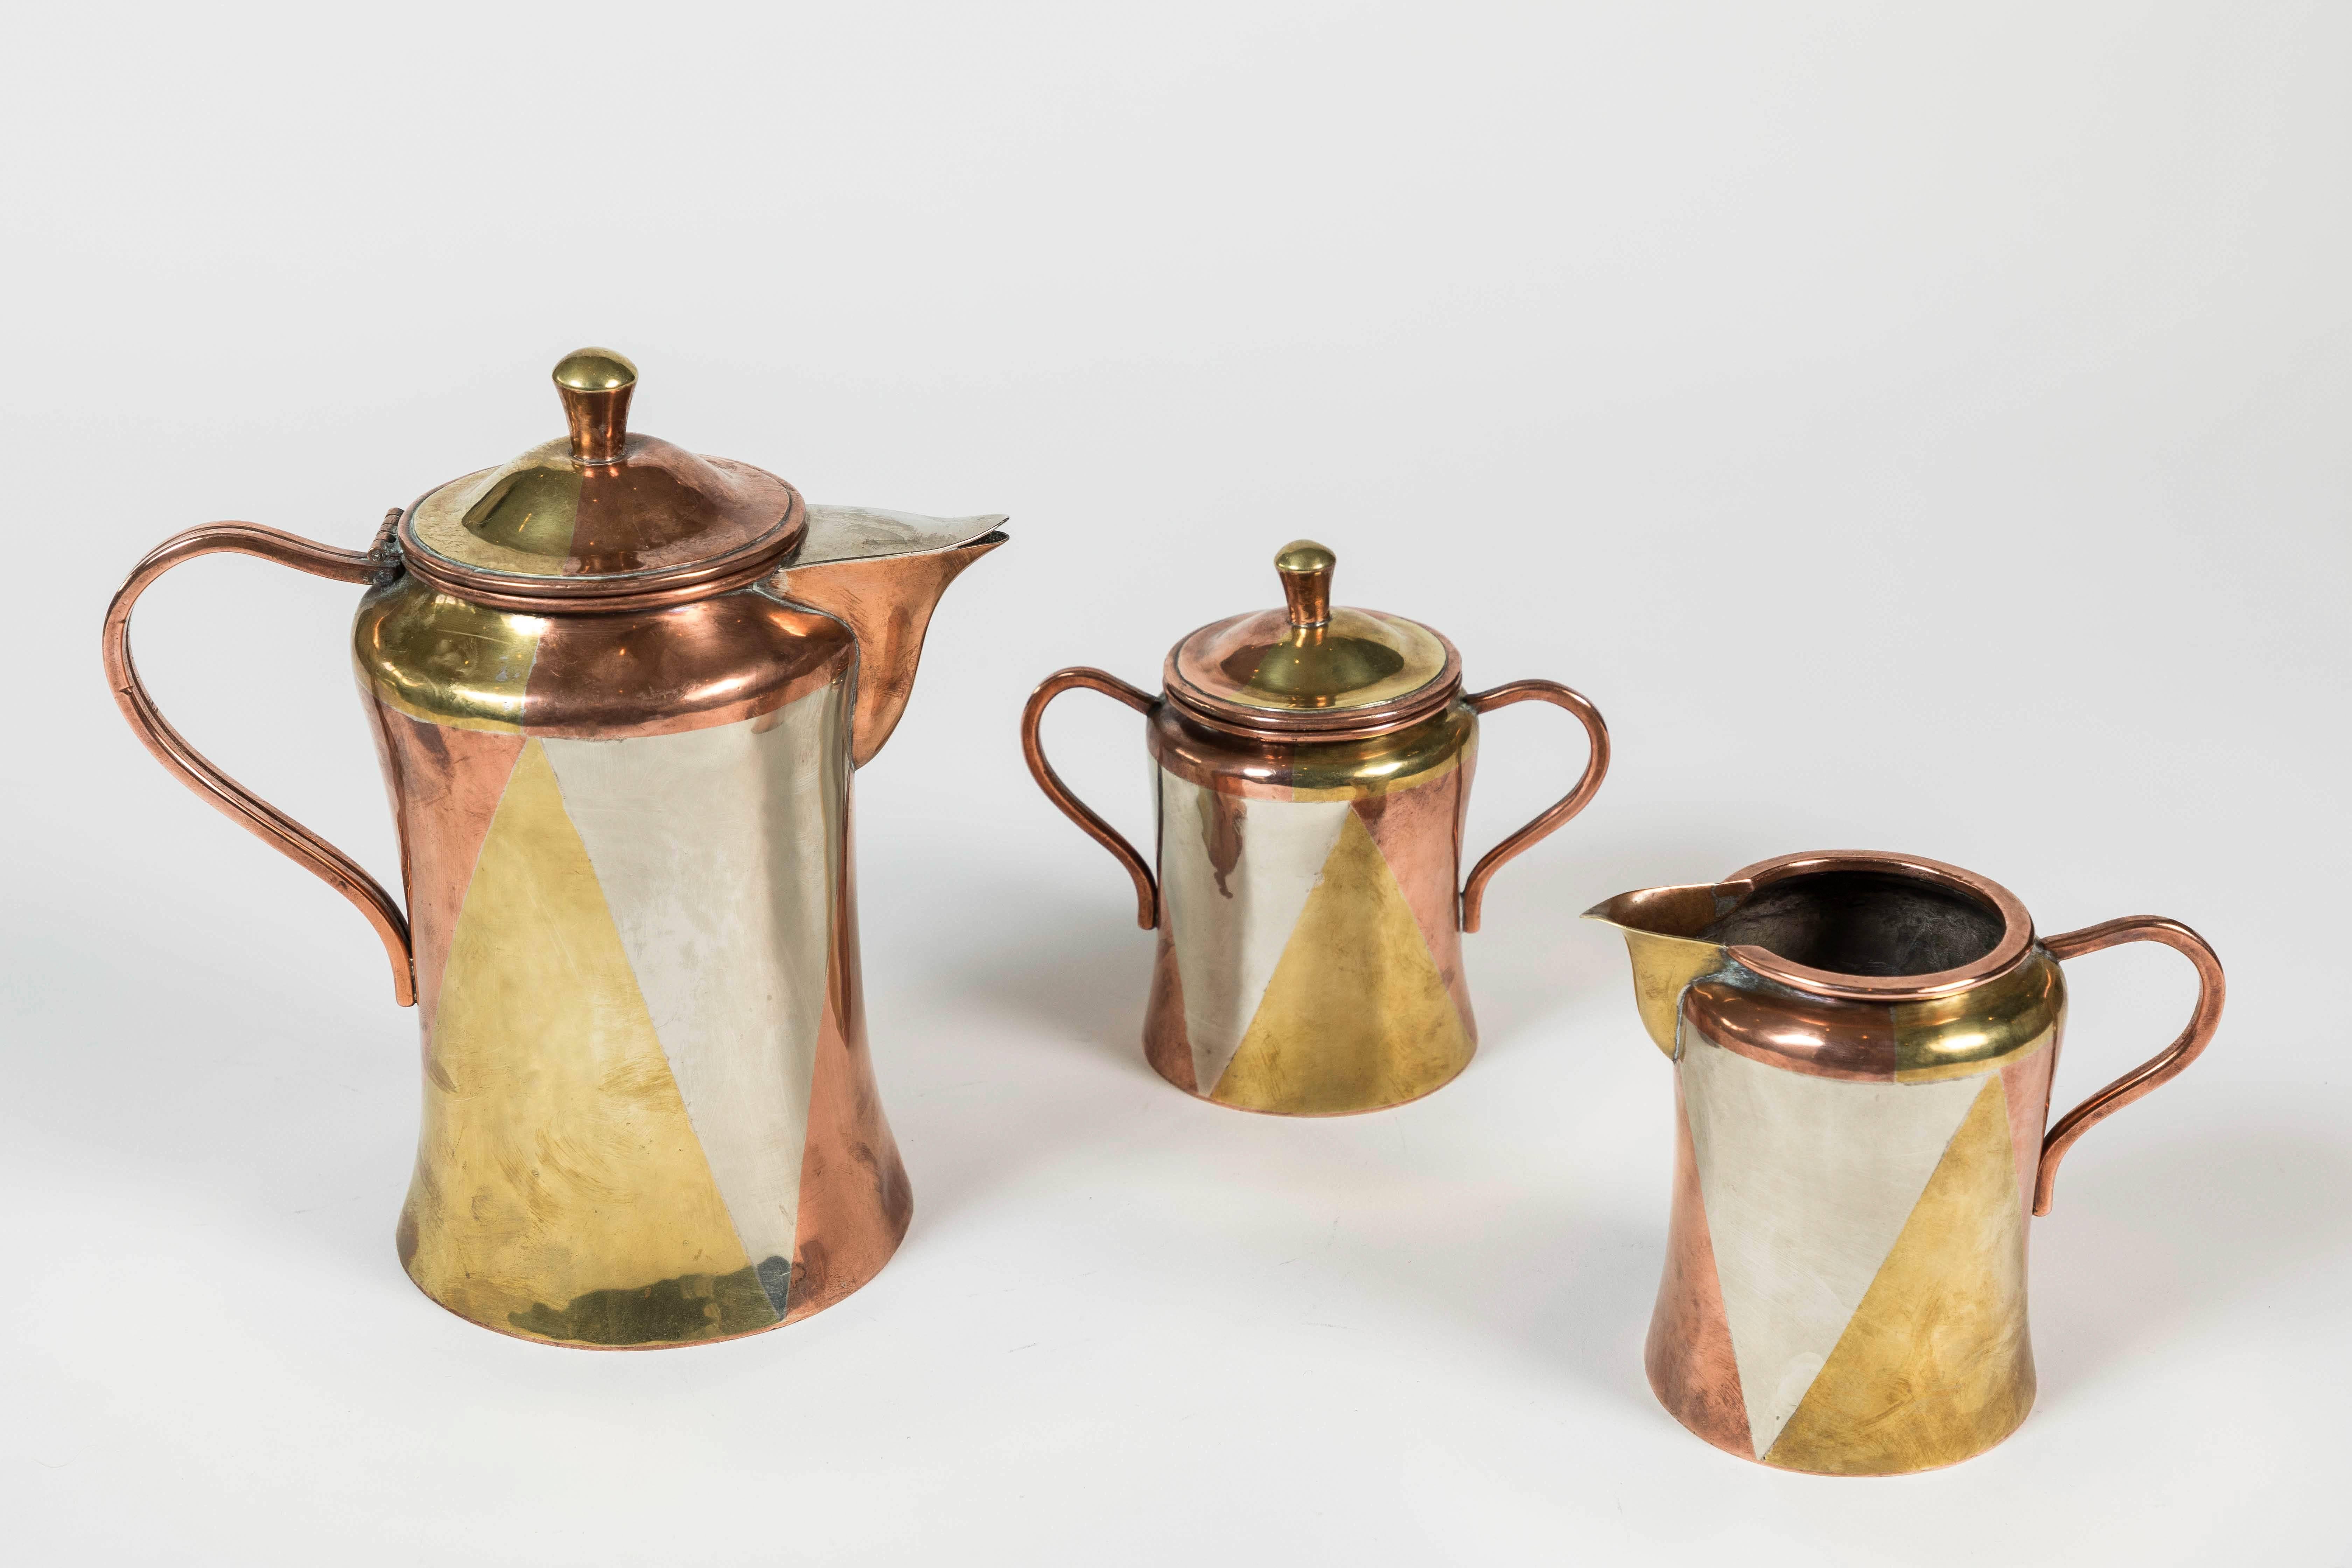 Mid century Mexican Modernist set of coffee pot, cream and sugar, in mixed metals: brass, copper, alpaca. Made in Mexico

Measure: Coffee pot 8.5